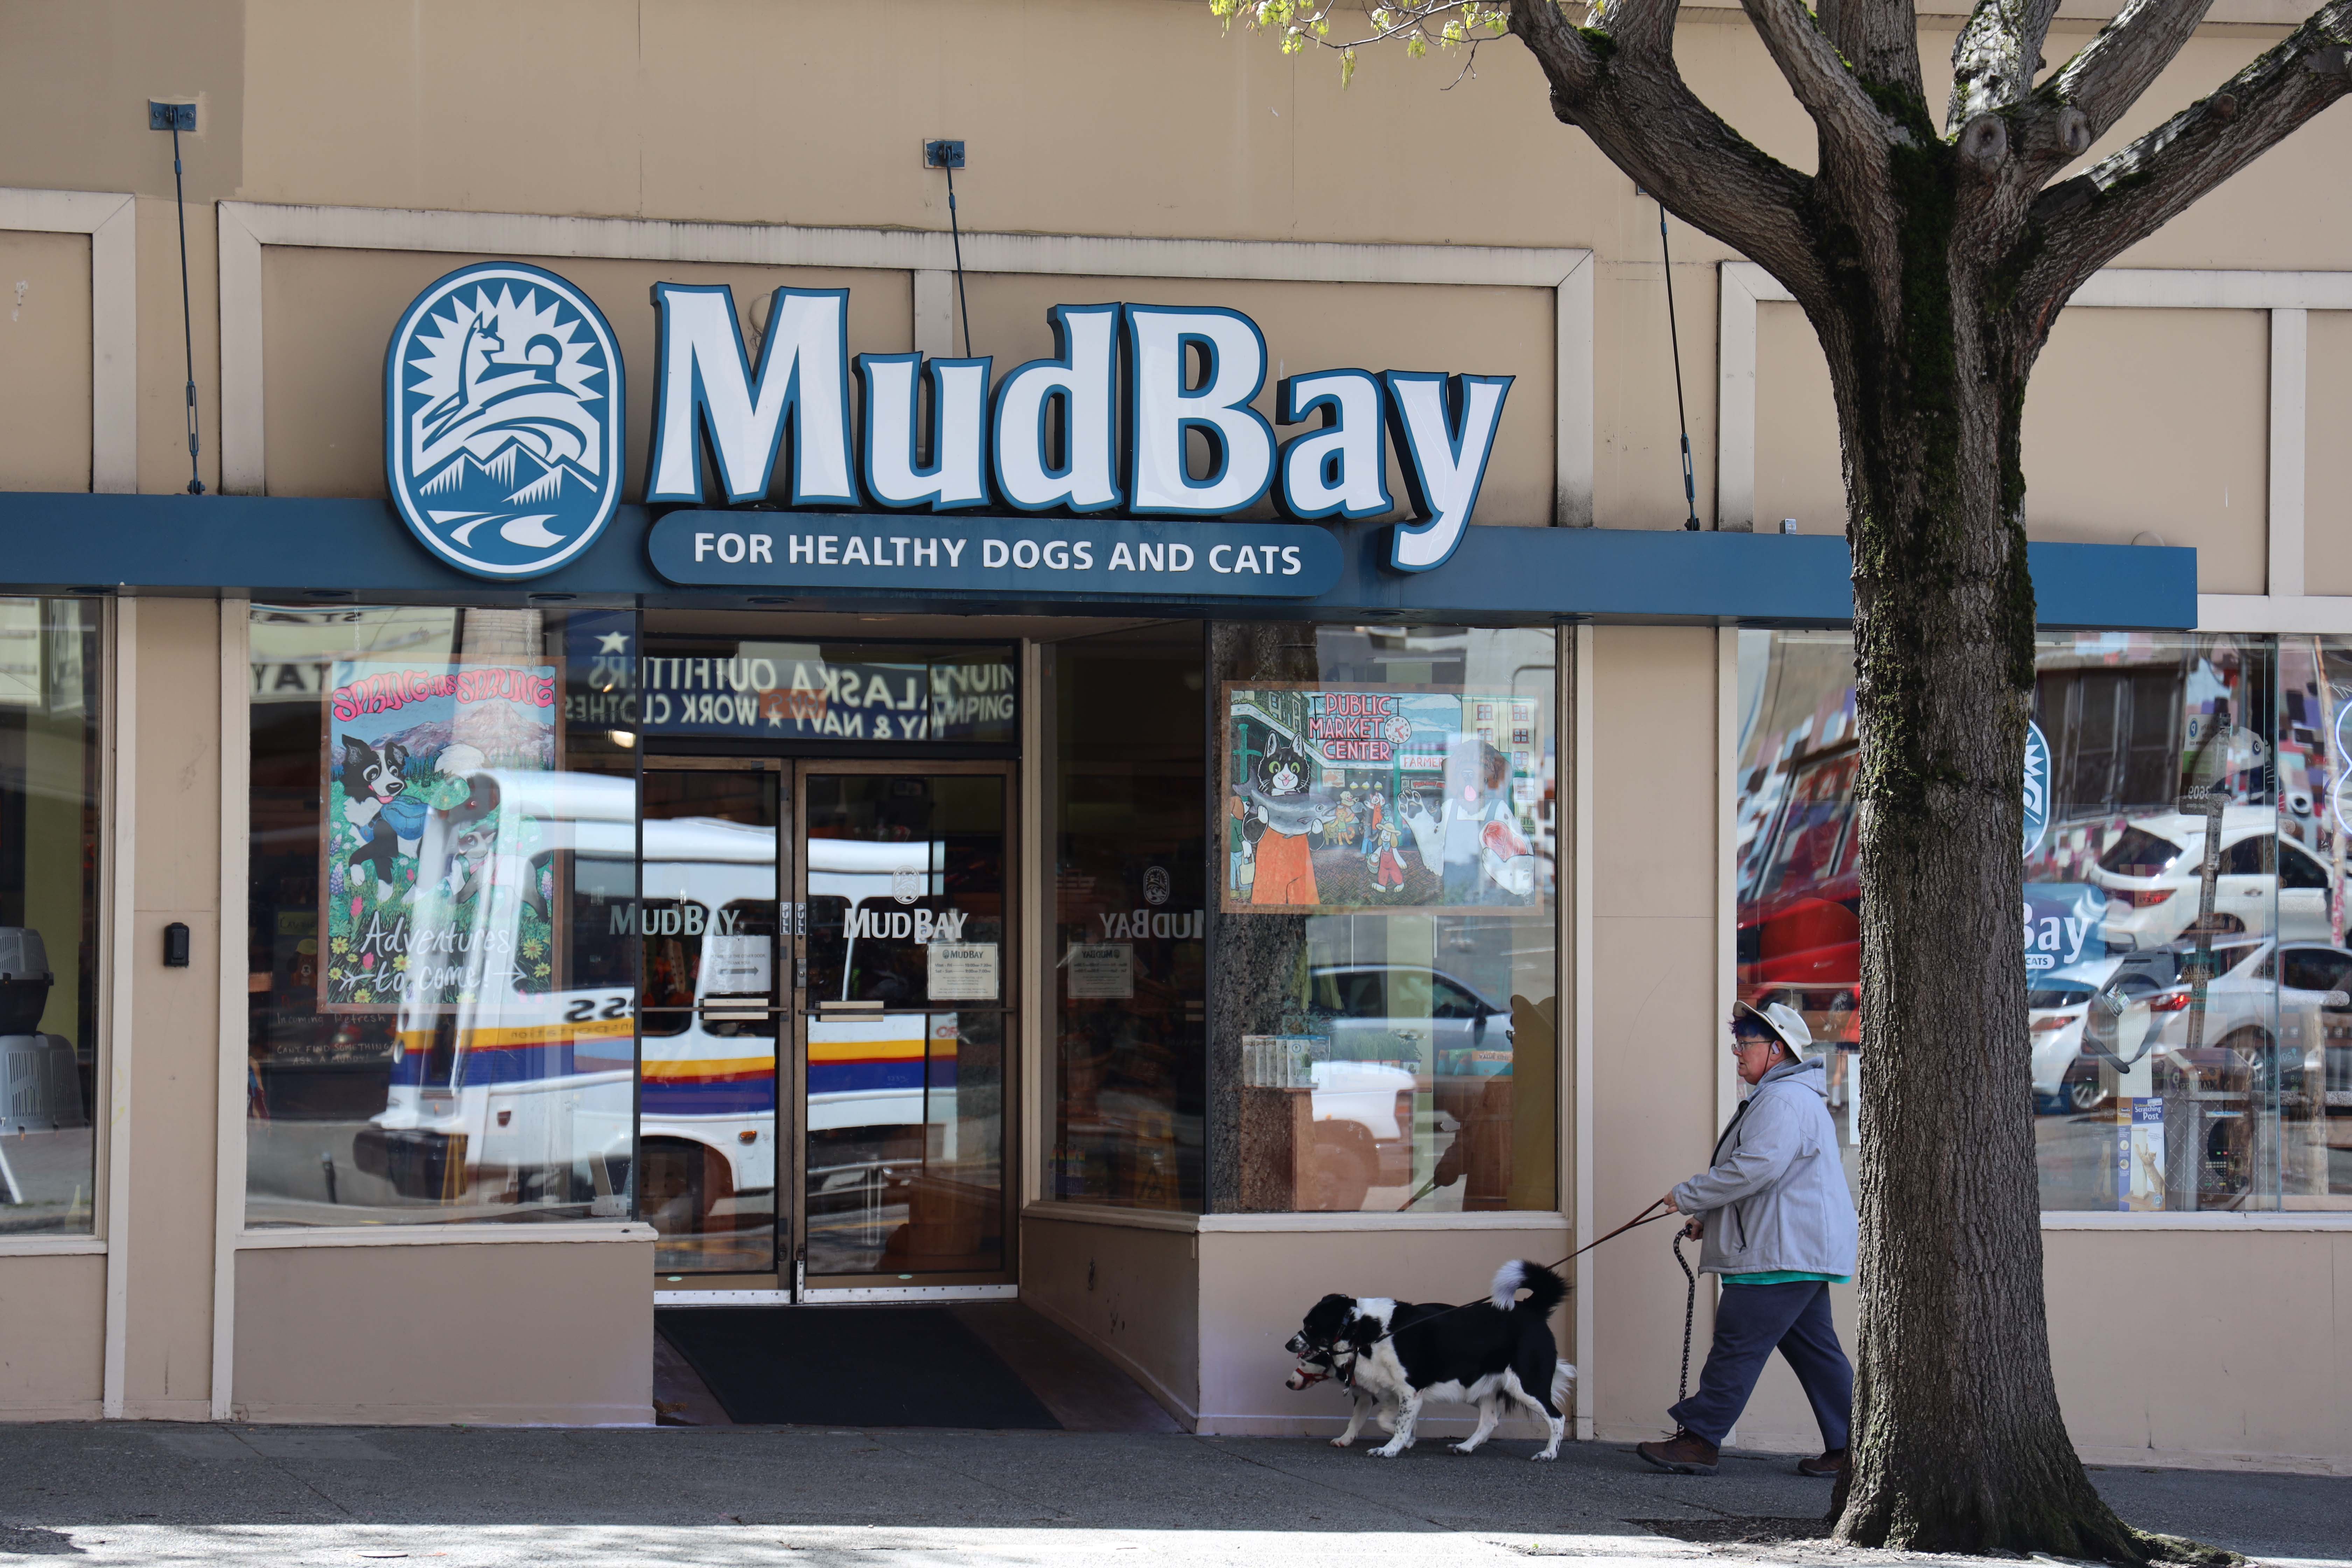 Mud Bay workers report worsening pay, conditions amid company losses